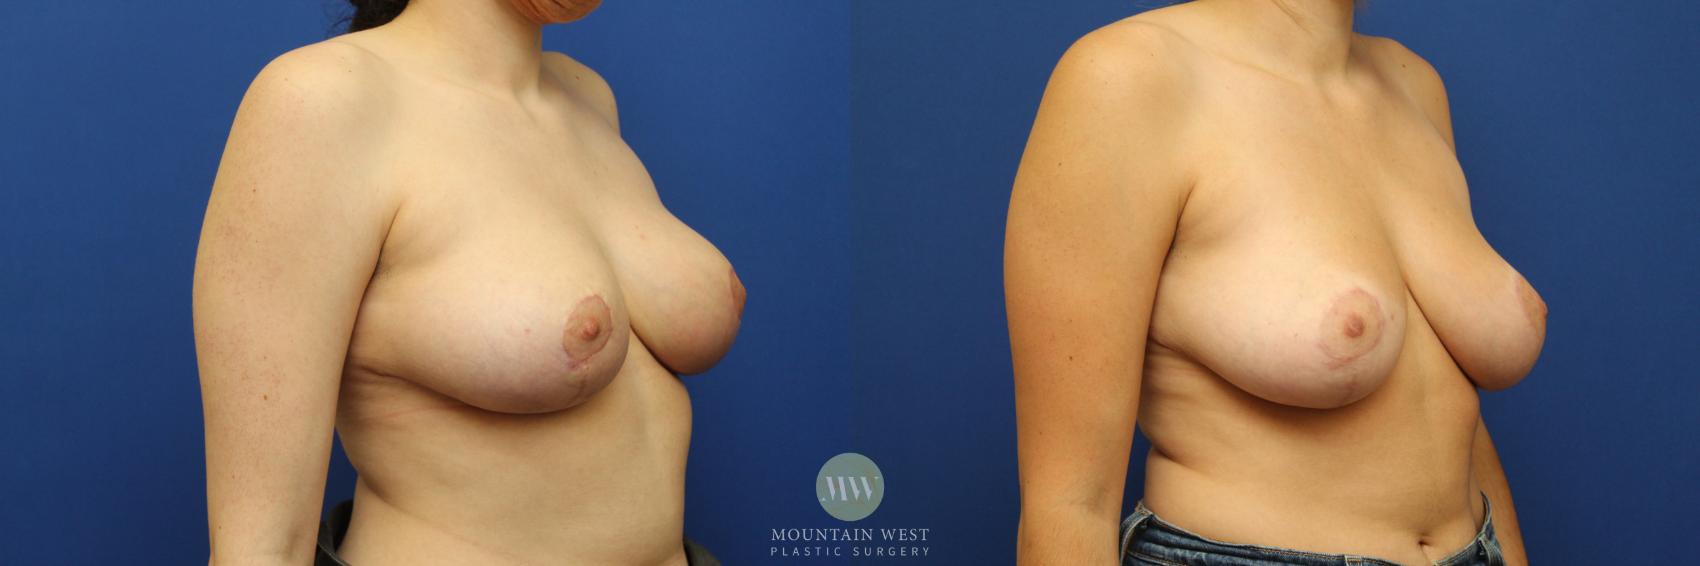 Breast Reduction, 3 and 6 months postop